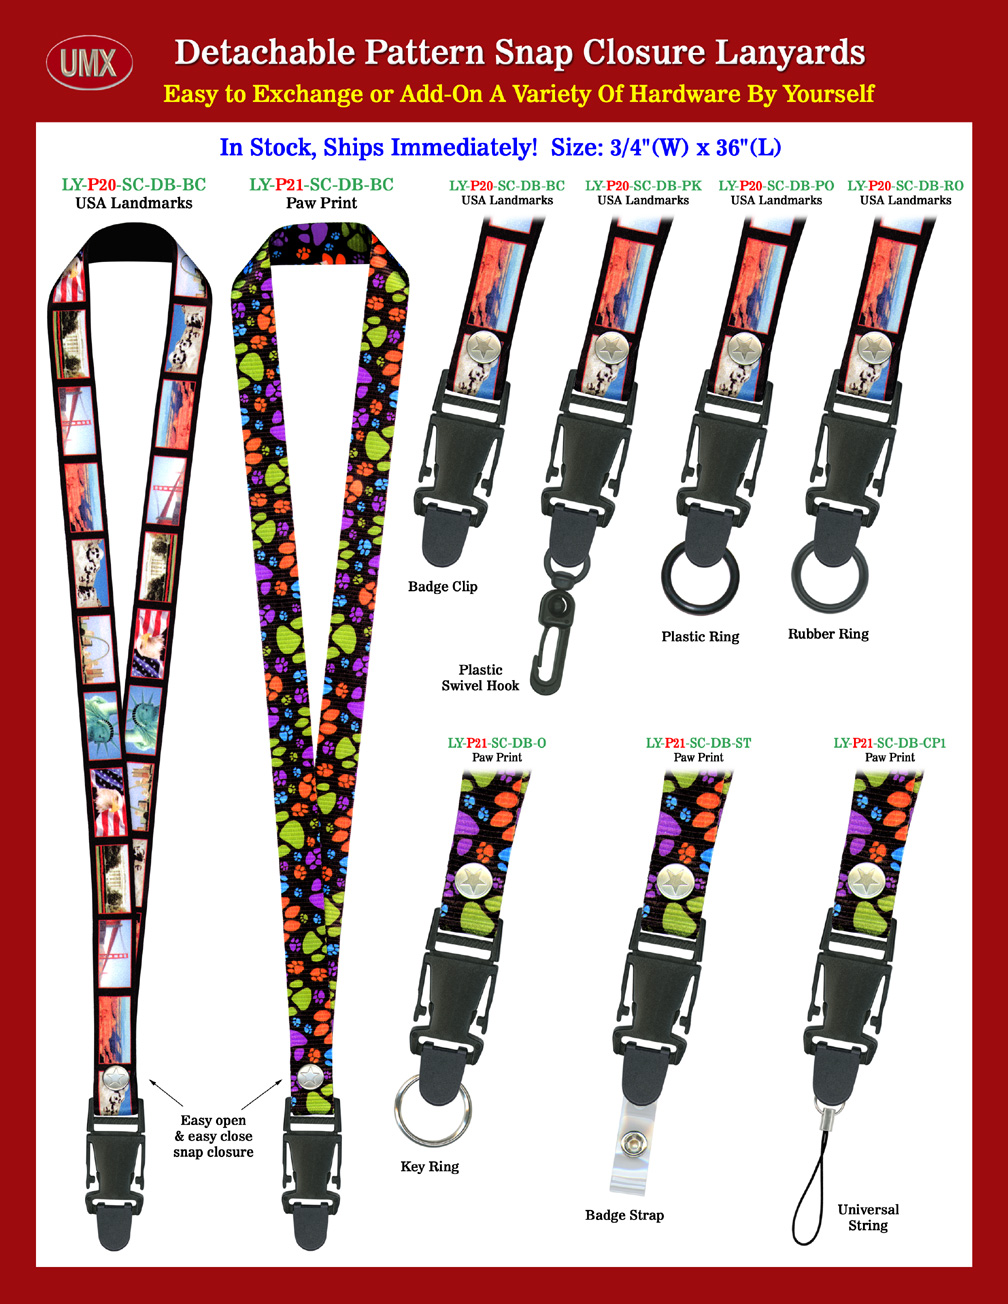 3/4" Quick Release Snap Closure Lanyards with USA-Landmark and Paw-Print Themes.